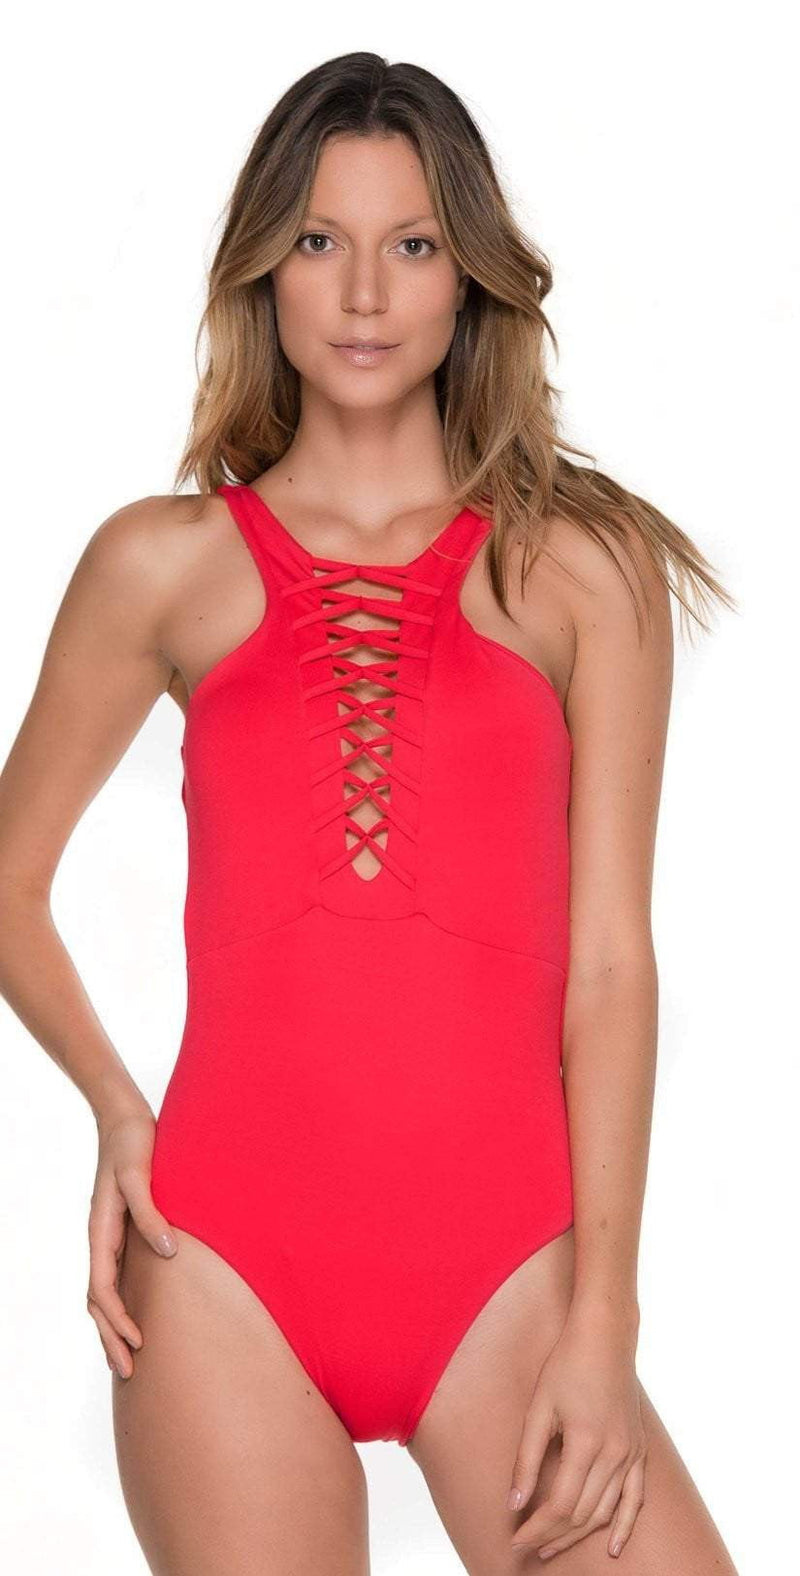 Malai High Neck One Piece in Cherry OP0092: